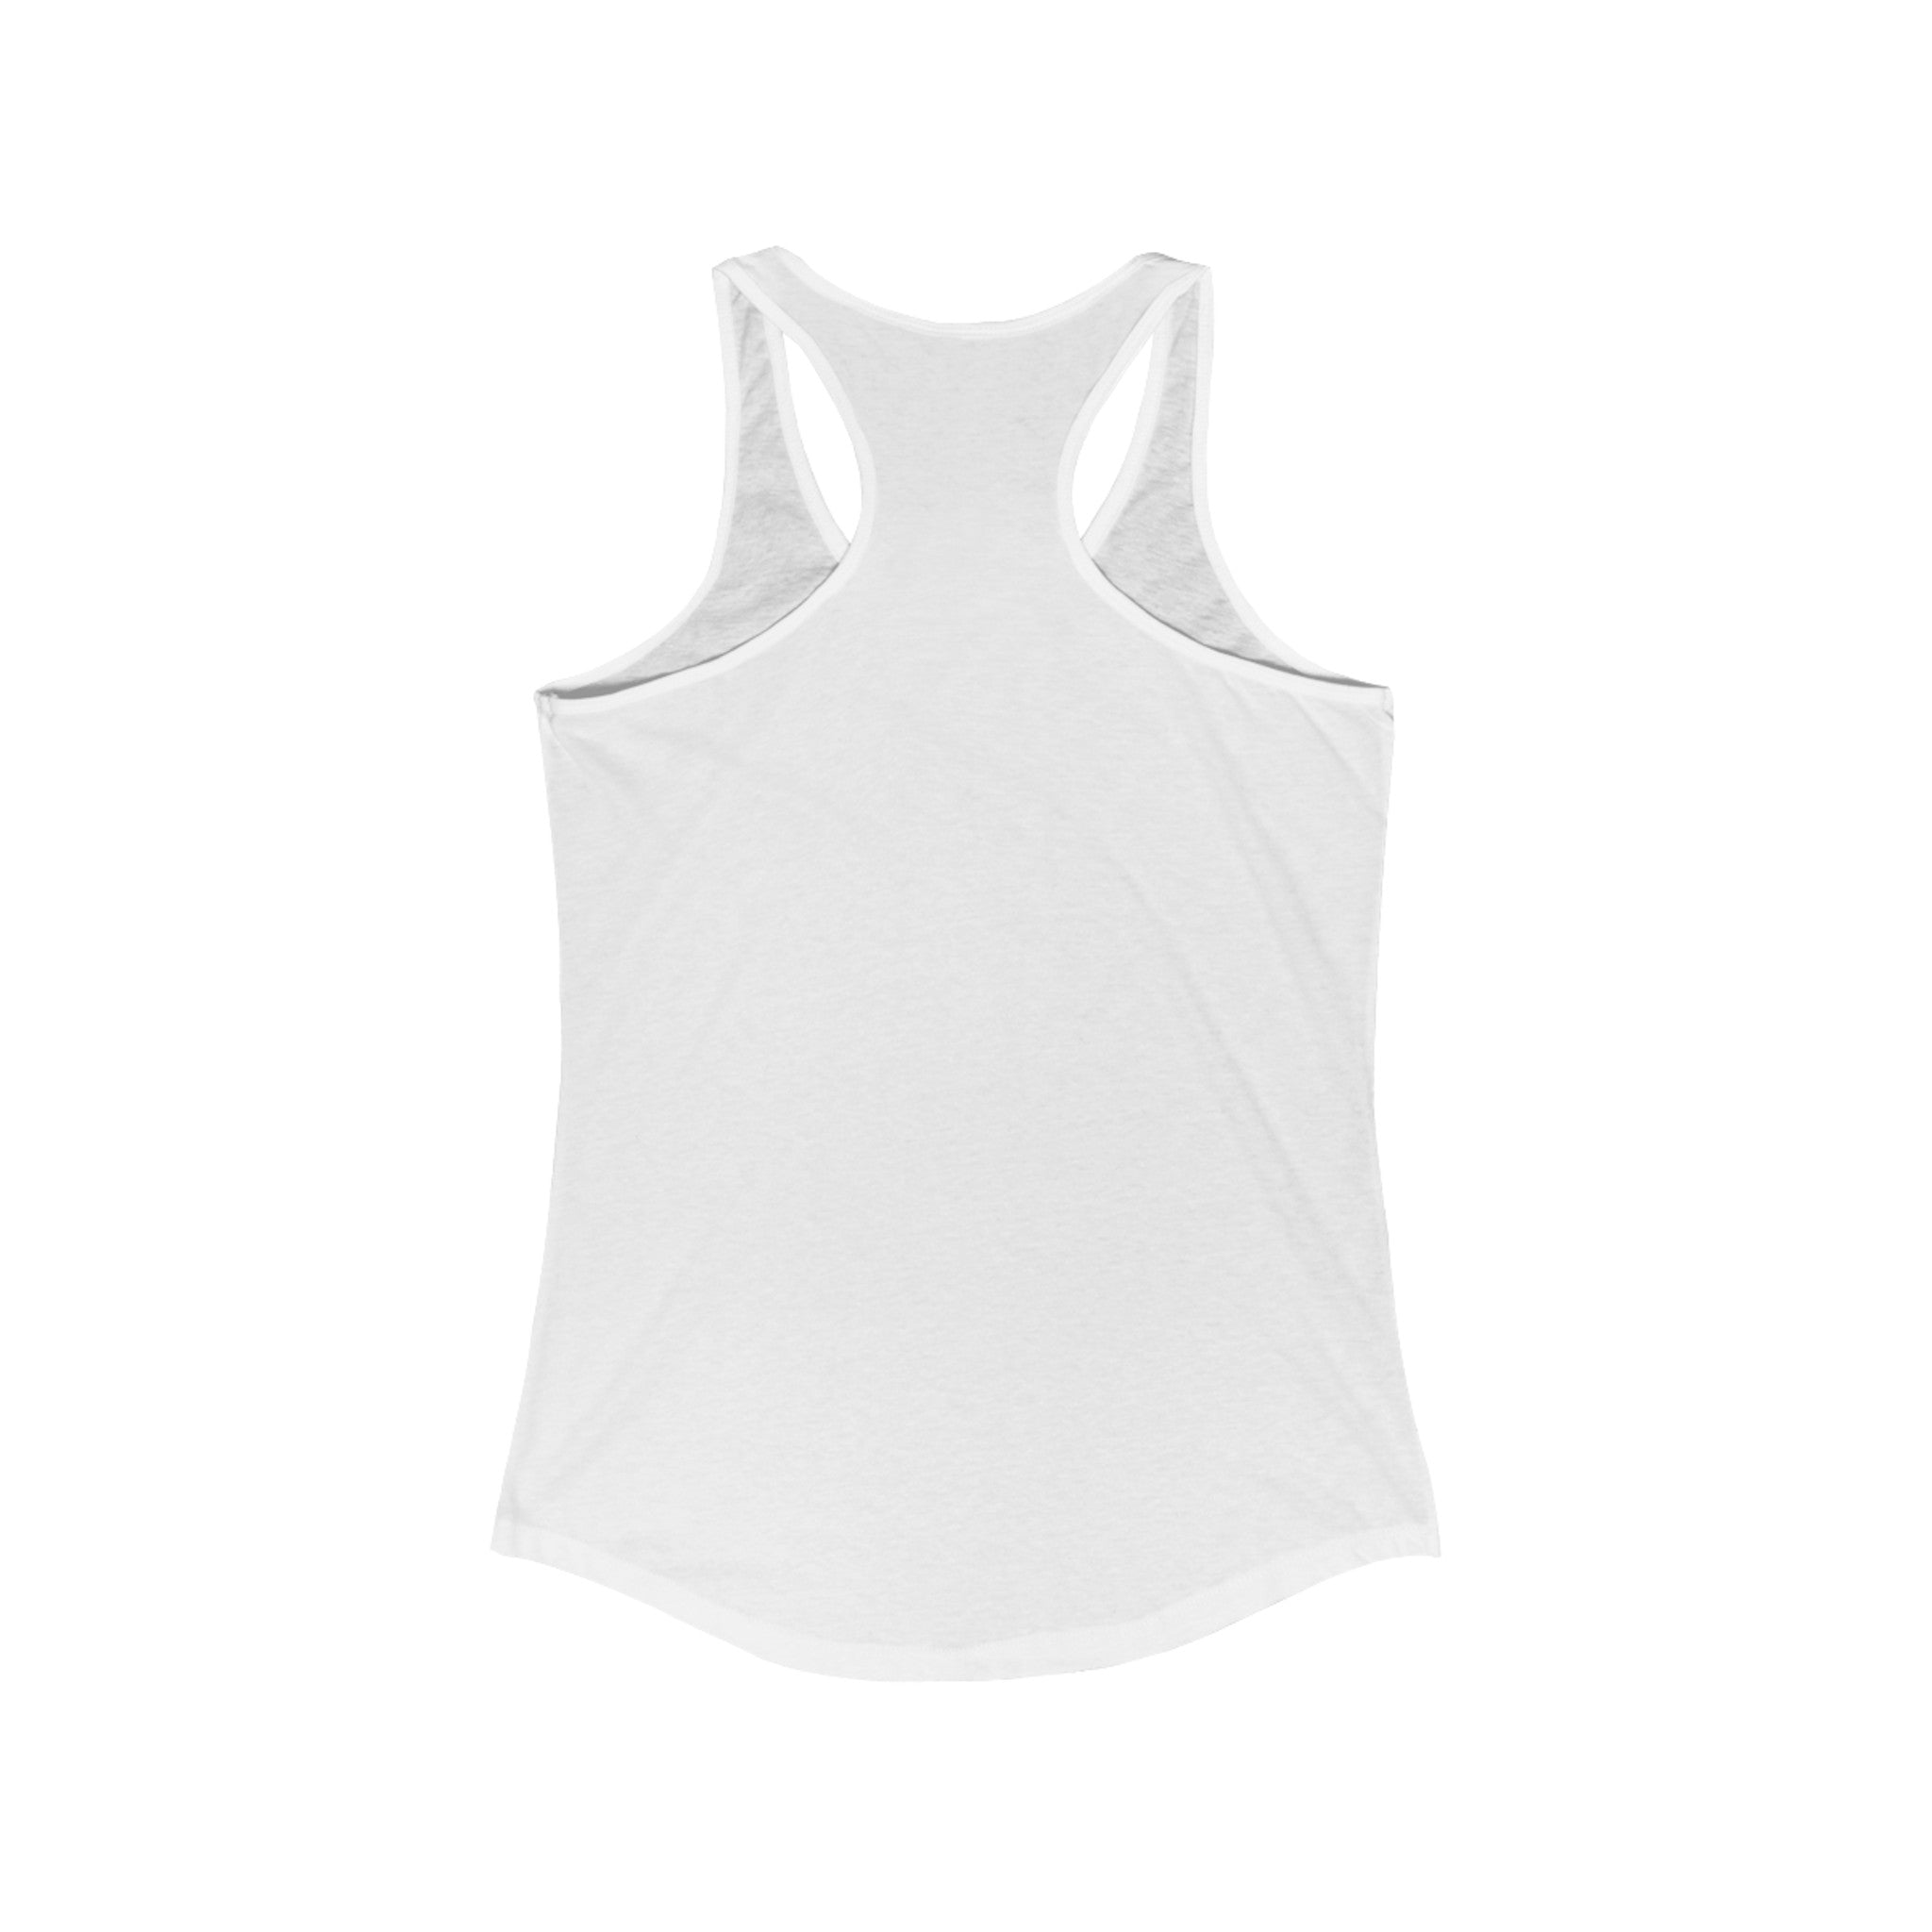 A white sleeveless RU - Women's Racerback Tank viewed from the back, highlighting its stylish activewear design and lightweight fabric.